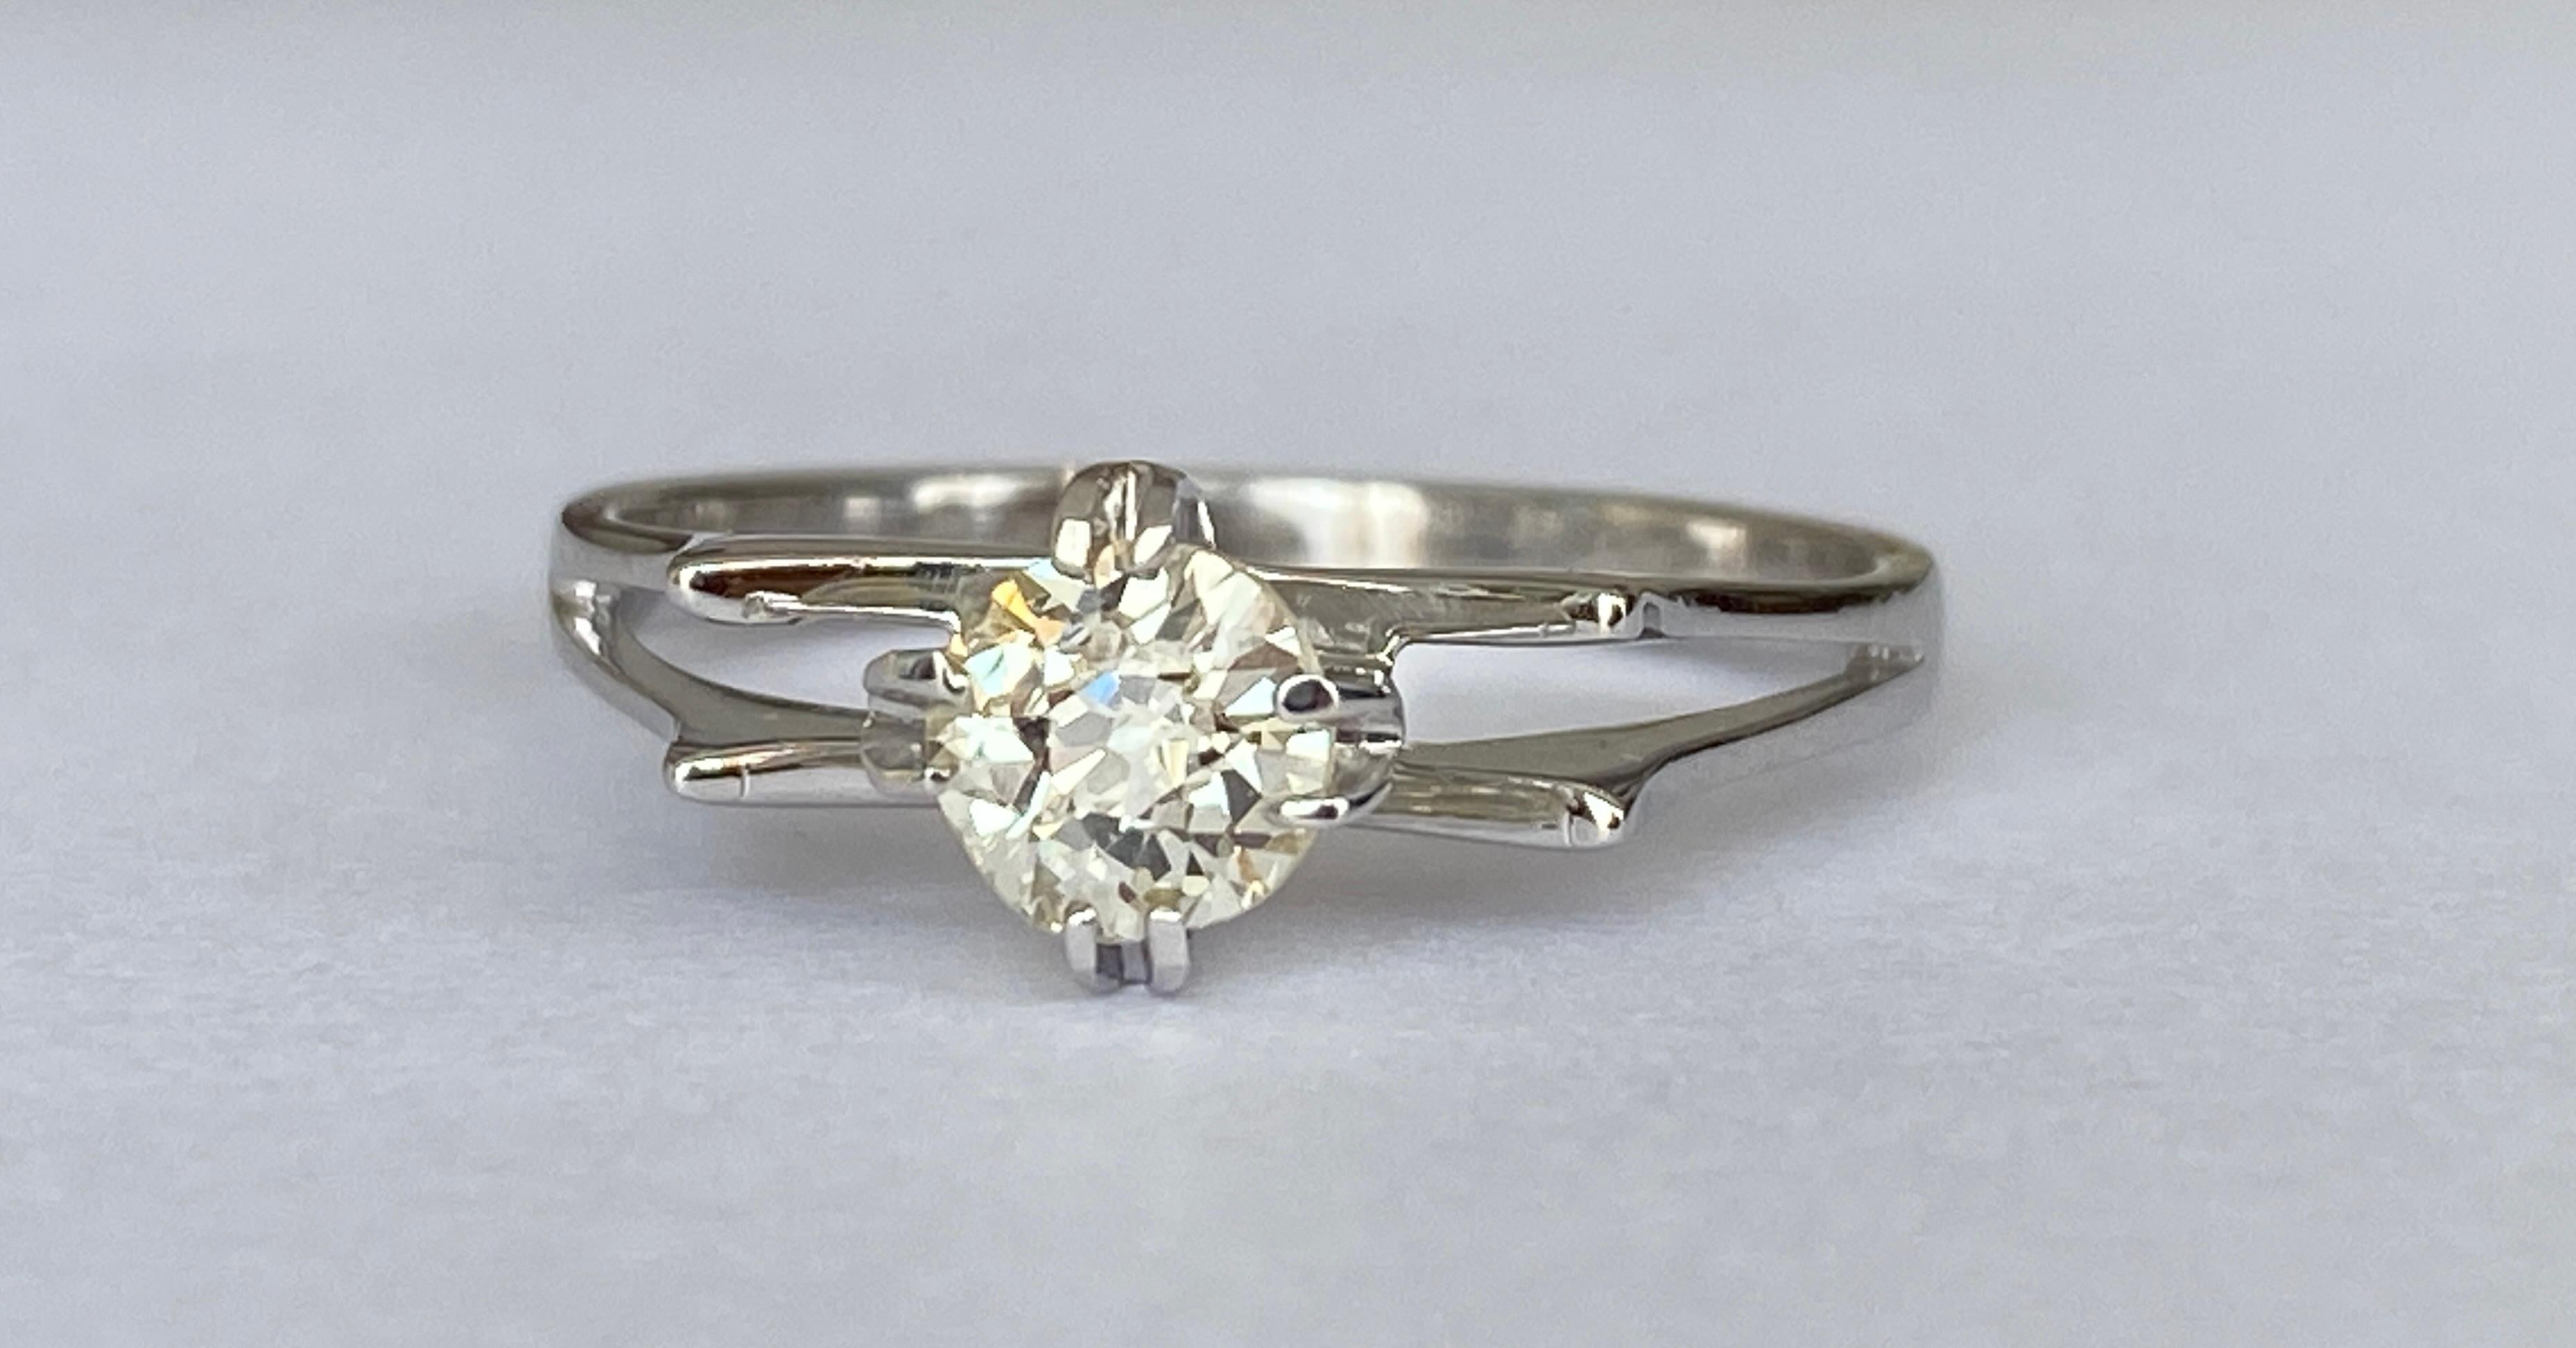 Engagement antique 18 kt white gold solitaire ring with 1 Bolshevik cut diamond in the midden, approx. 0.55 crt of quality L/SI2. 
Gold content: 18 (approved)
Weight: 3.6 grams
Ring size:18.50 mm
Offered in good condition is antique 18 kt white gold